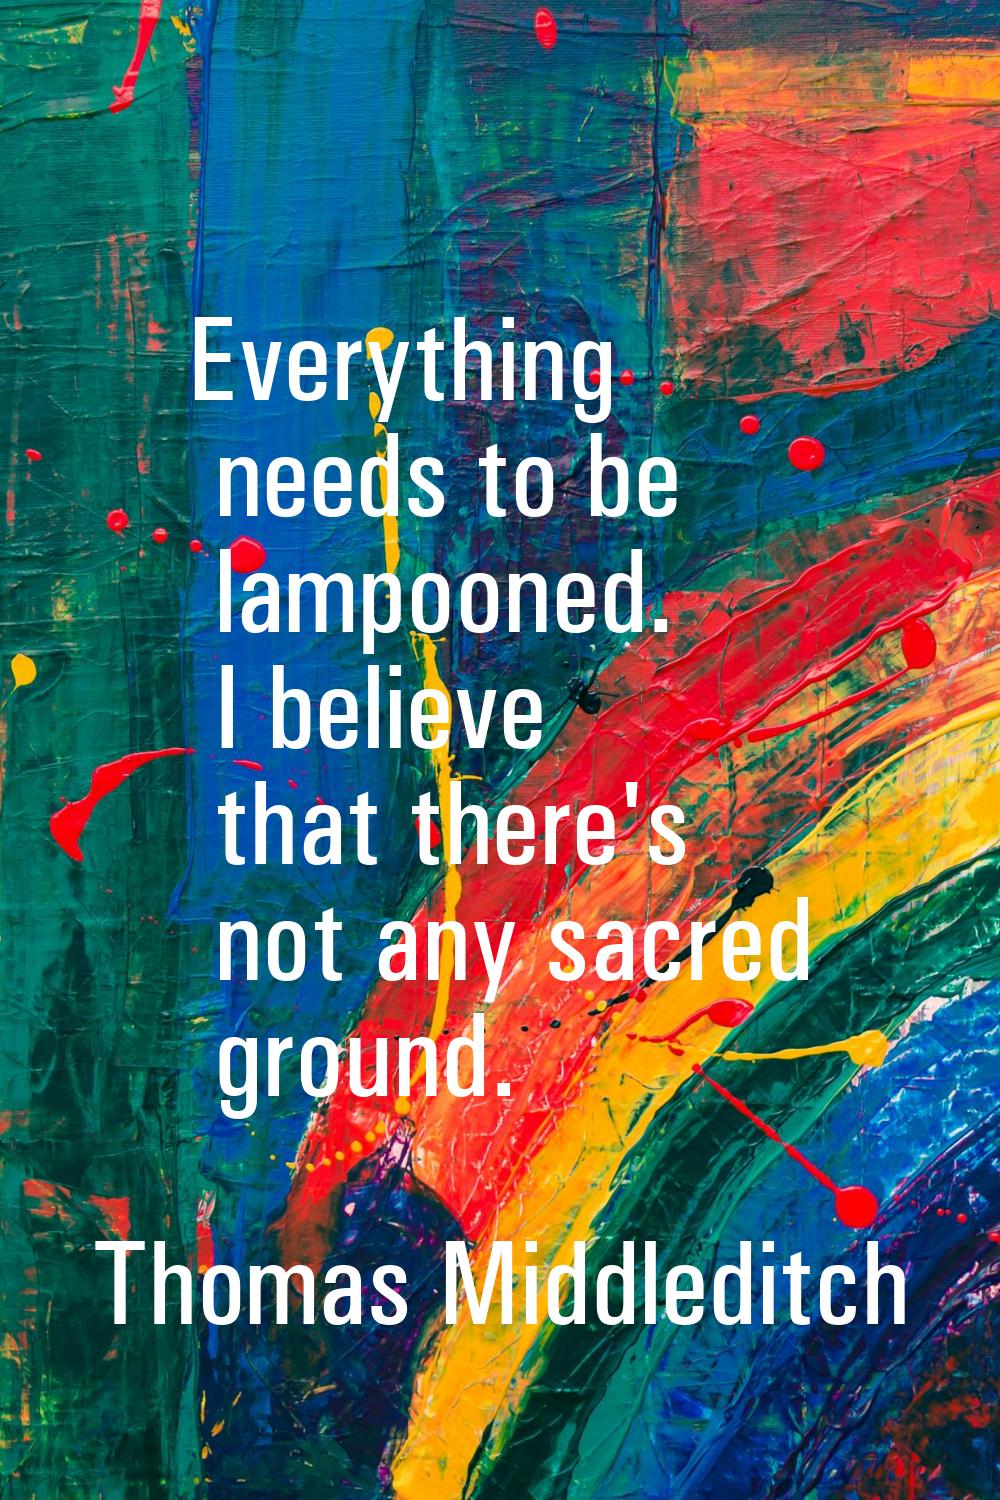 Everything needs to be lampooned. I believe that there's not any sacred ground.